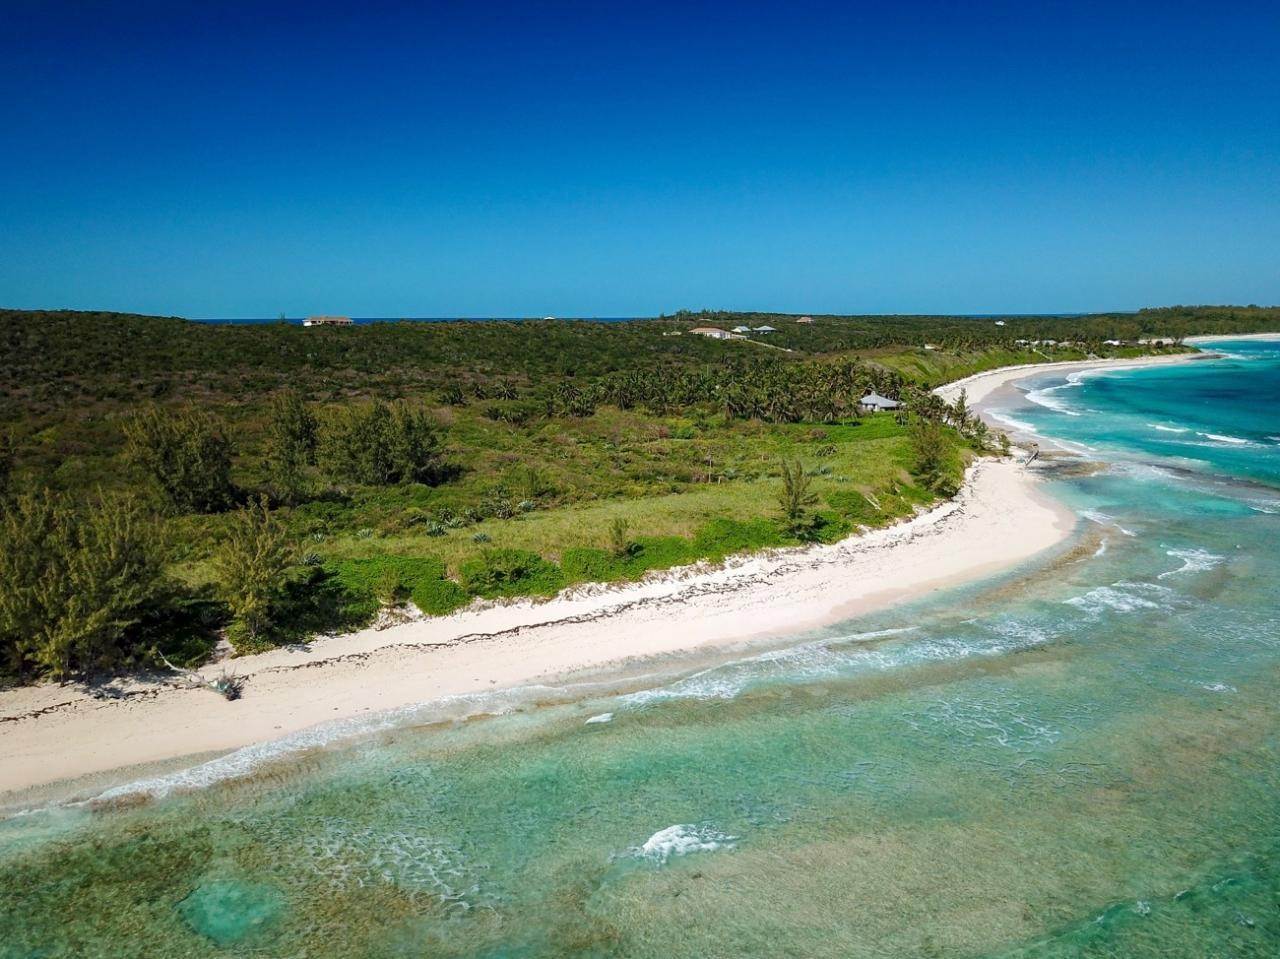 8. Lots / Acreage for Sale at Governors Harbour, Eleuthera, Bahamas